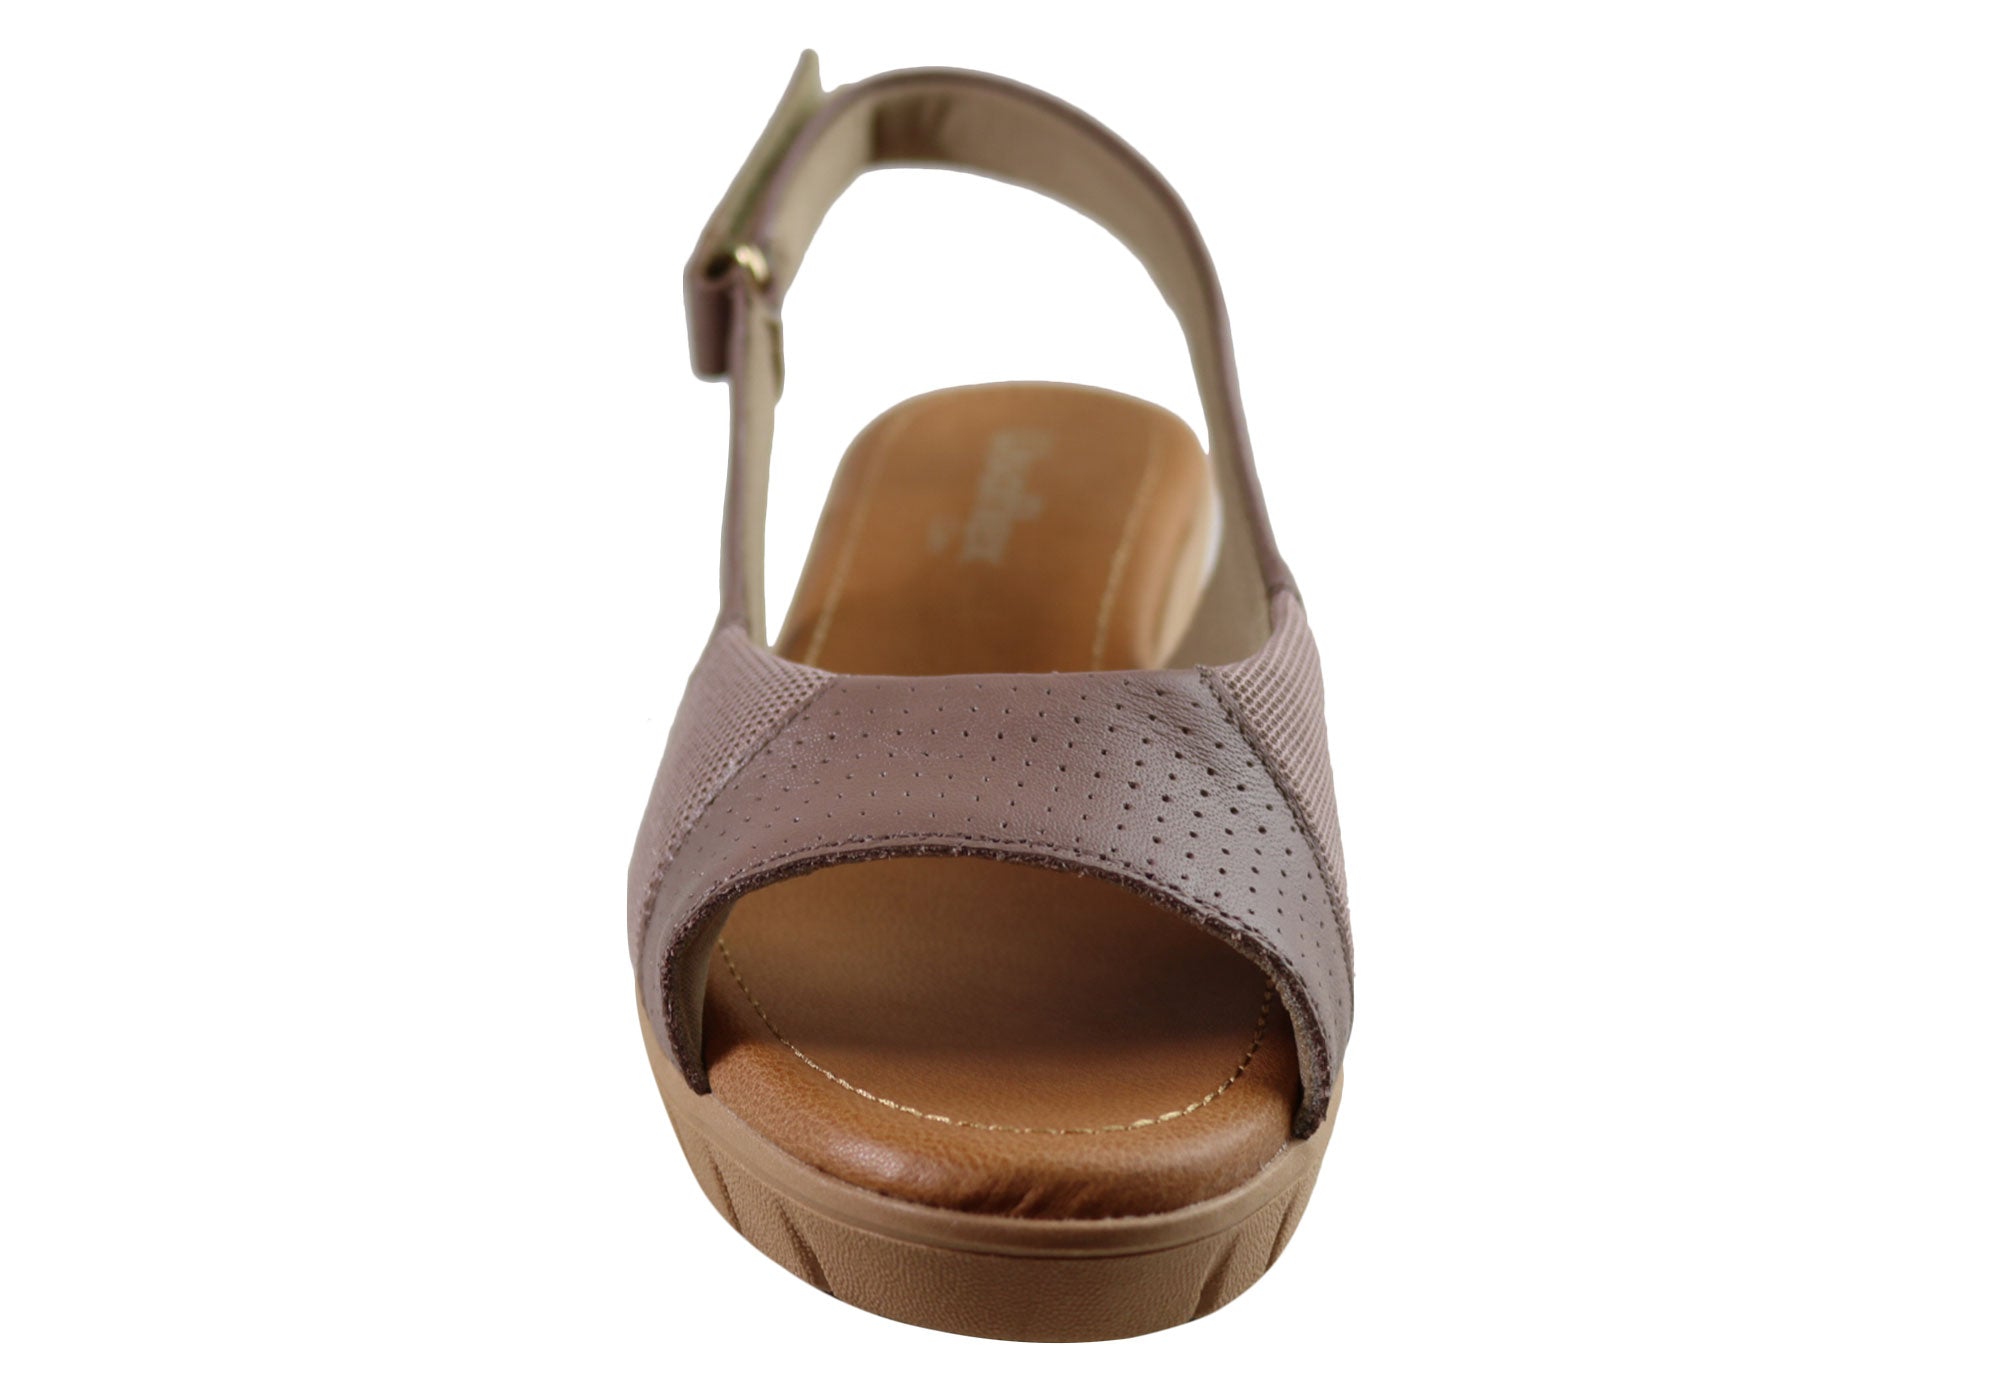 Usaflex Algiers Womens Comfortable Leather Sandals Made In Brazil